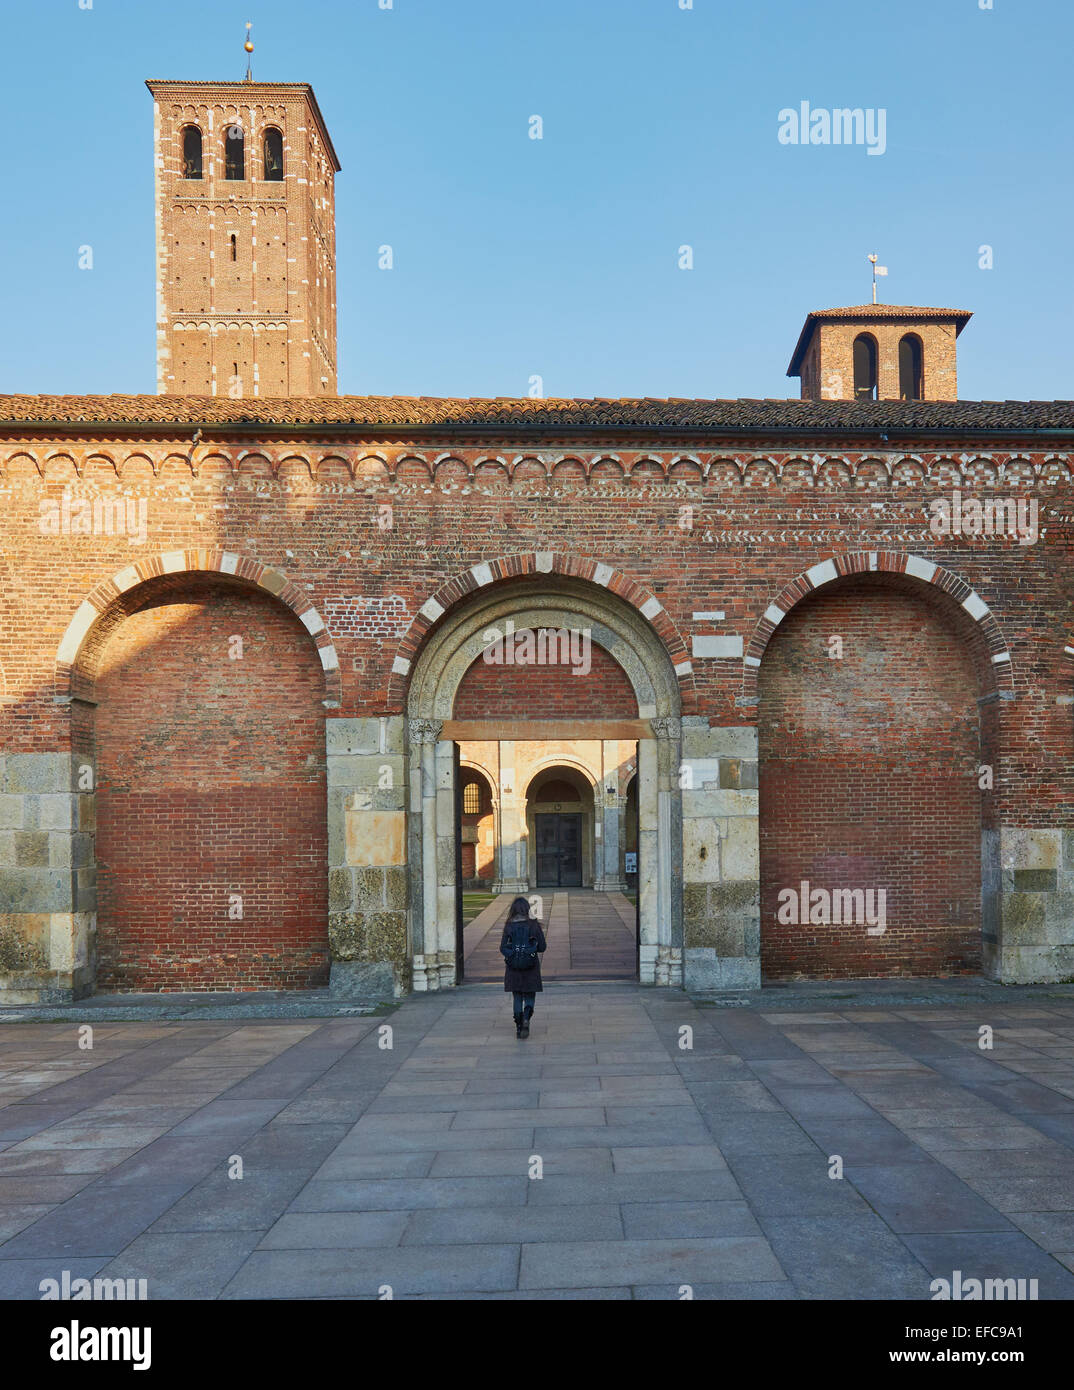 Entrance to Sant' Ambrogio red brick Romanesque basilica dating from 9th-12th century Milan Lombardy Italy Europe Stock Photo